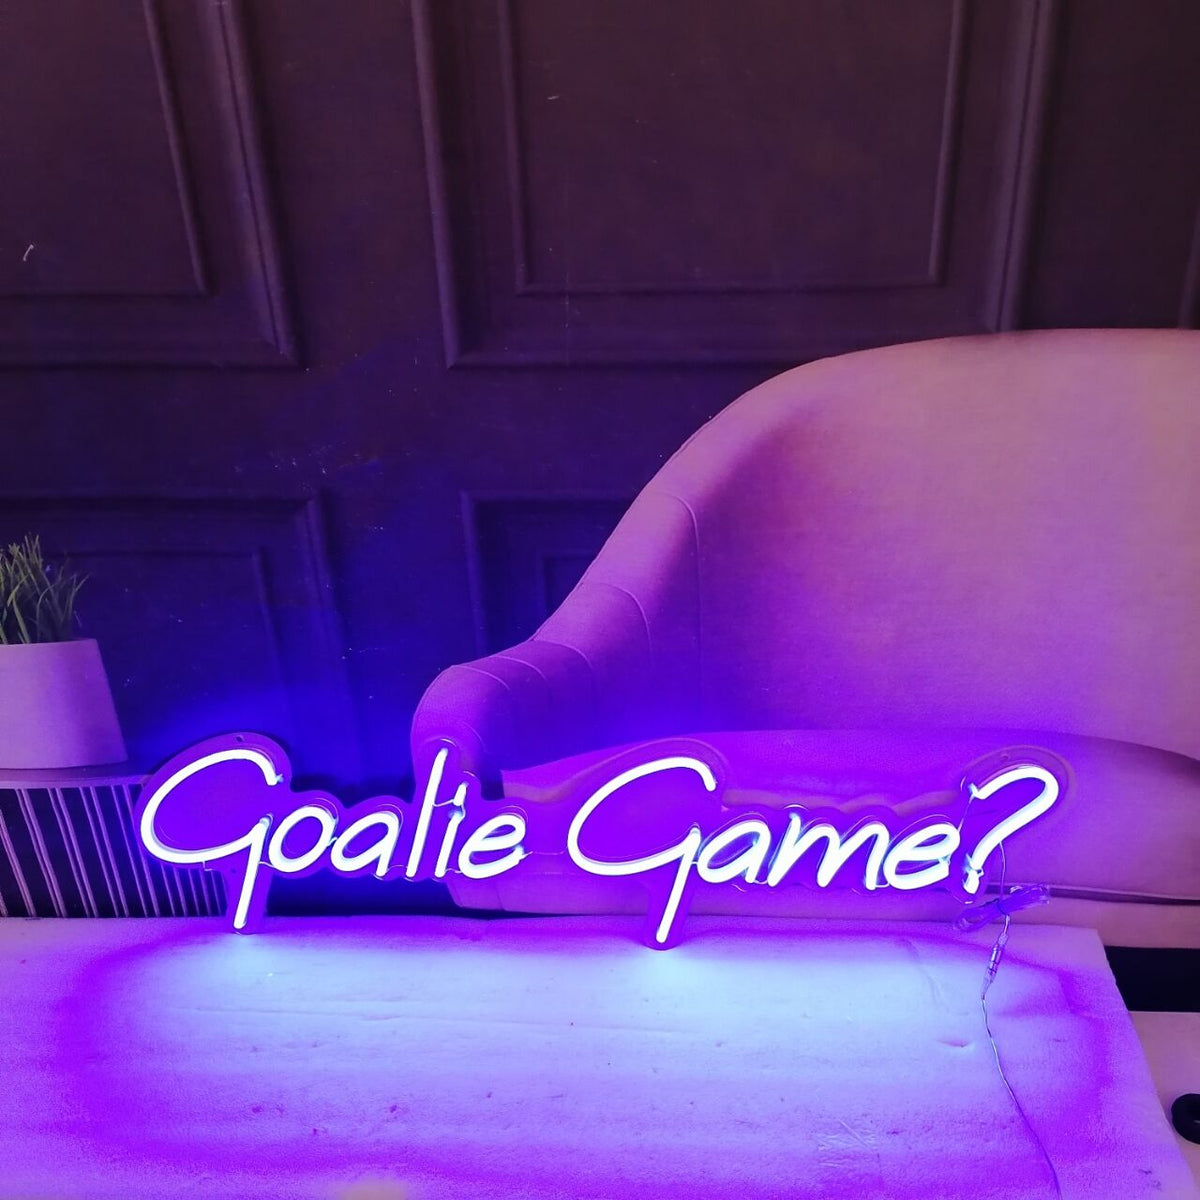 &quot;Goalie Game?&quot; Neon Led Sign